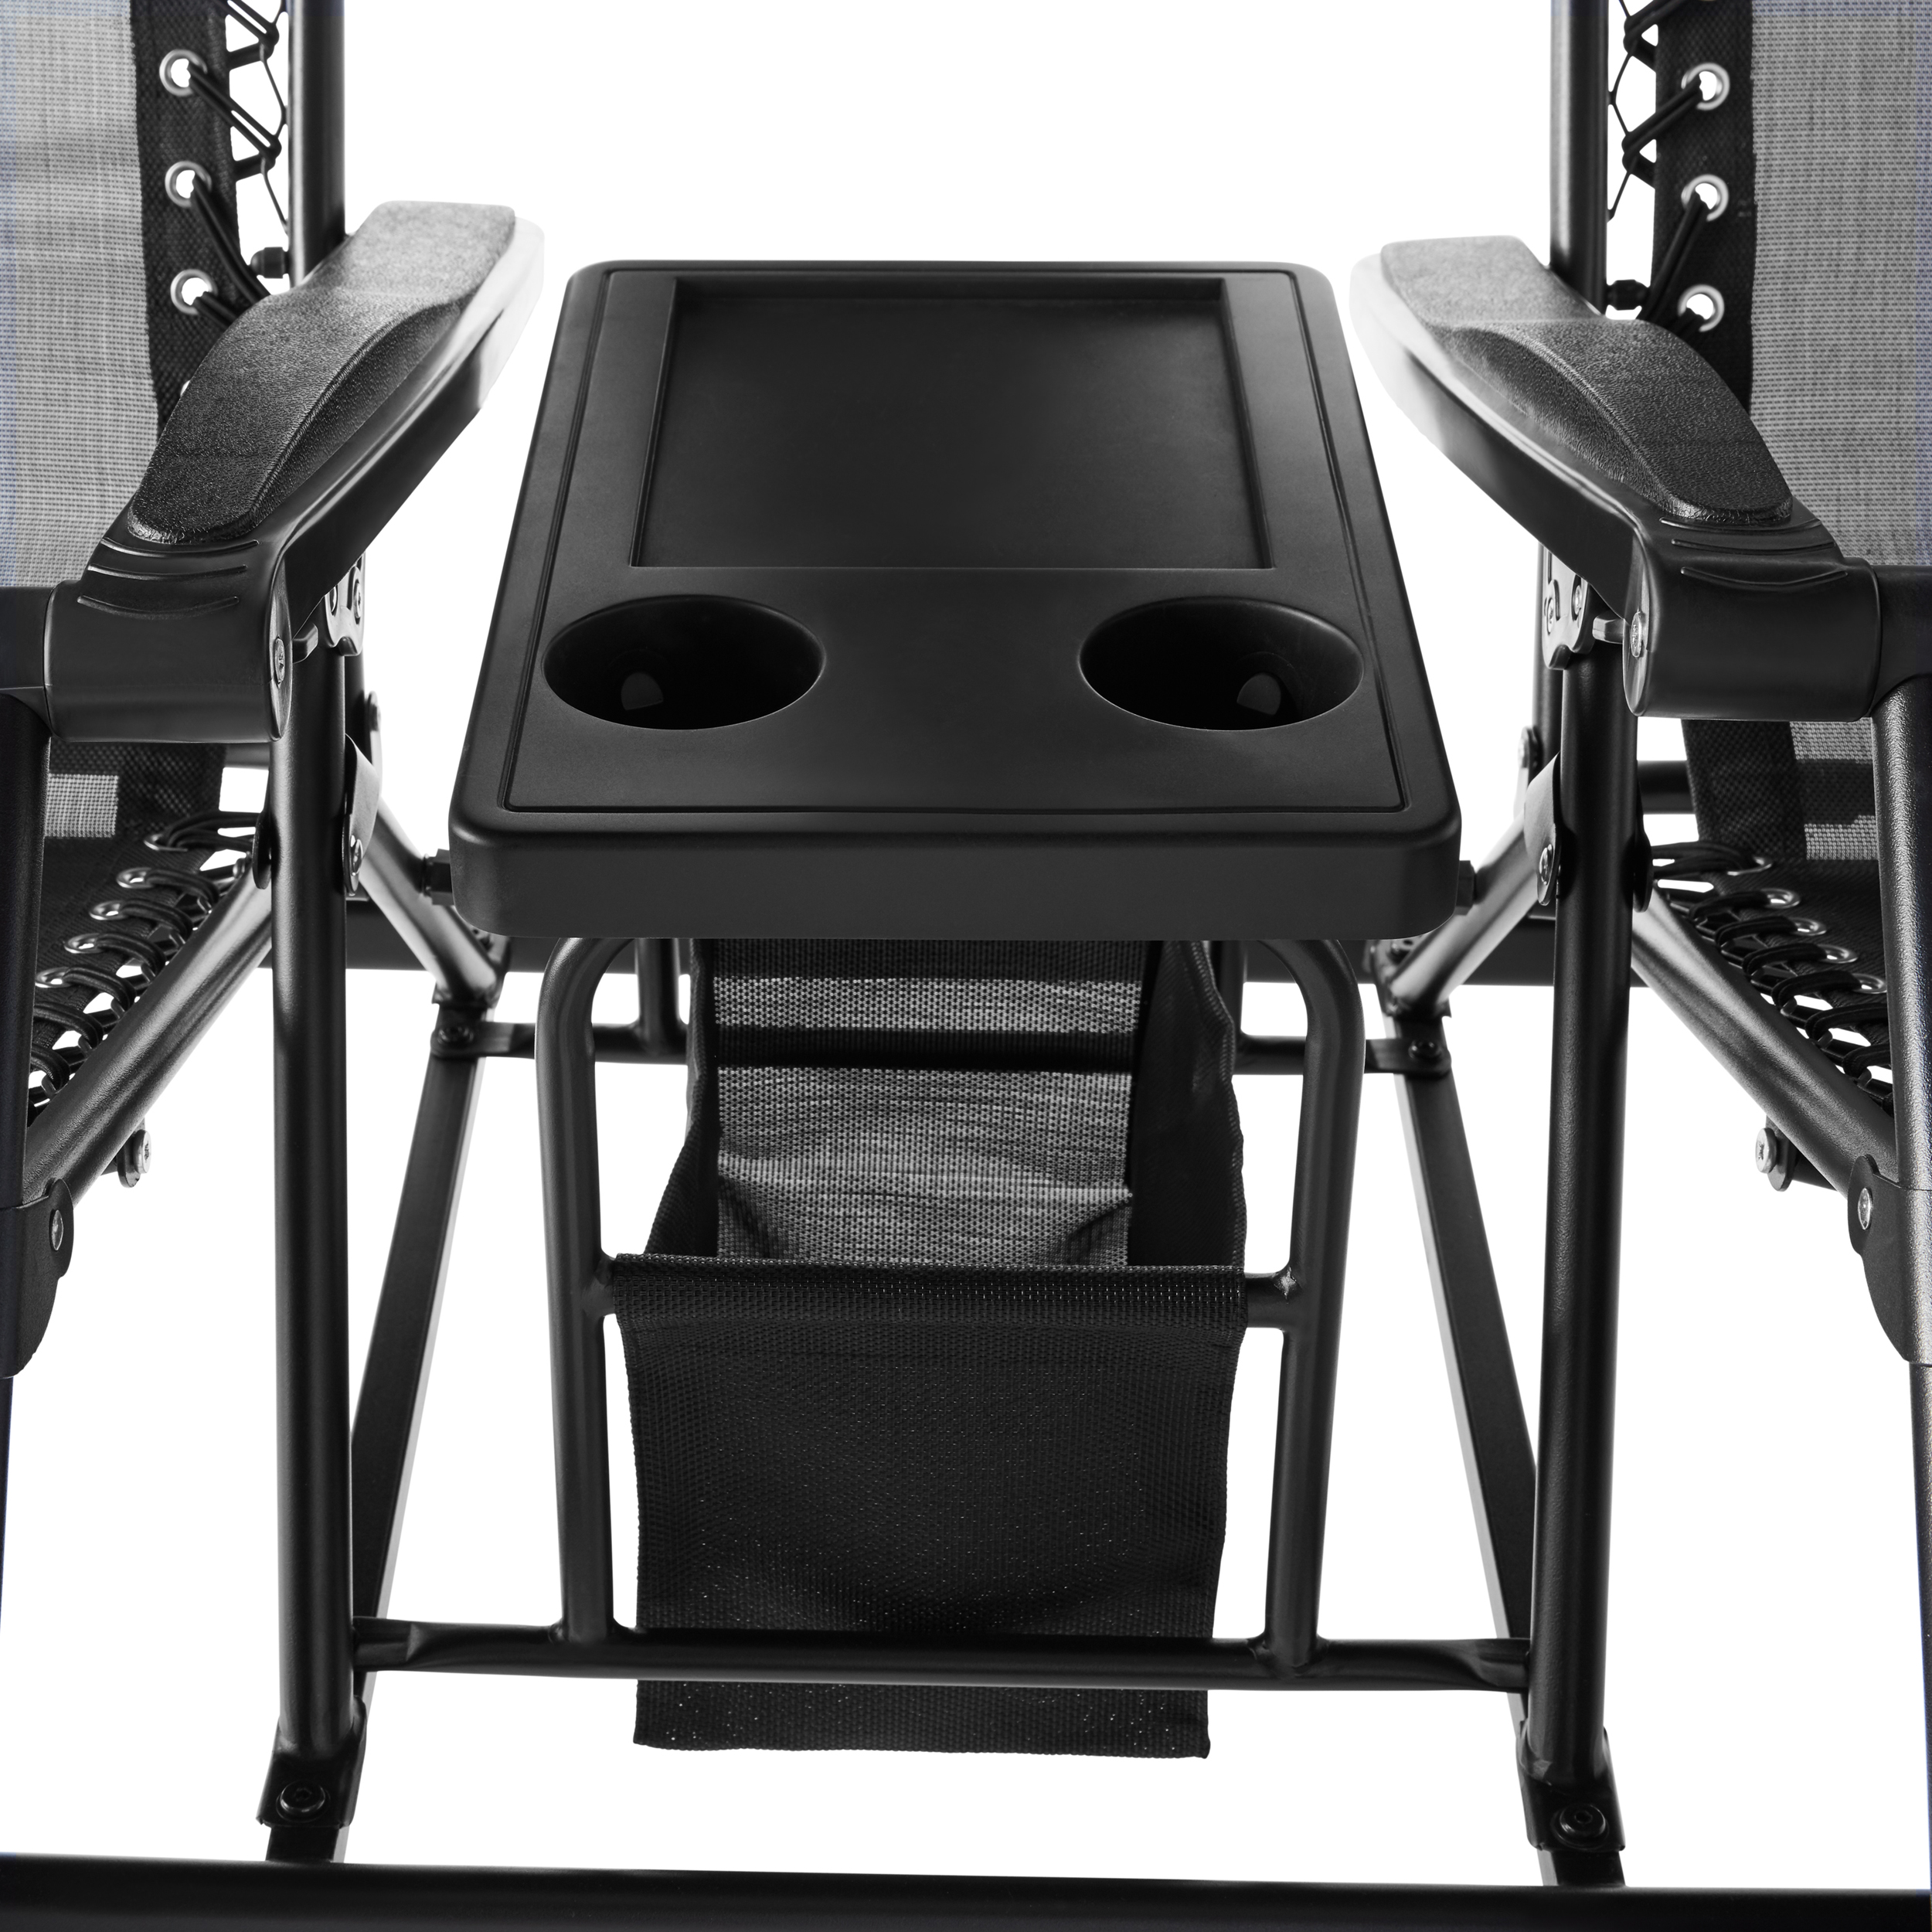 Mainstays 2-Seat Reclining Oversized Zero-Gravity Swing with Canopy and Center Storage Console, Black - image 4 of 8